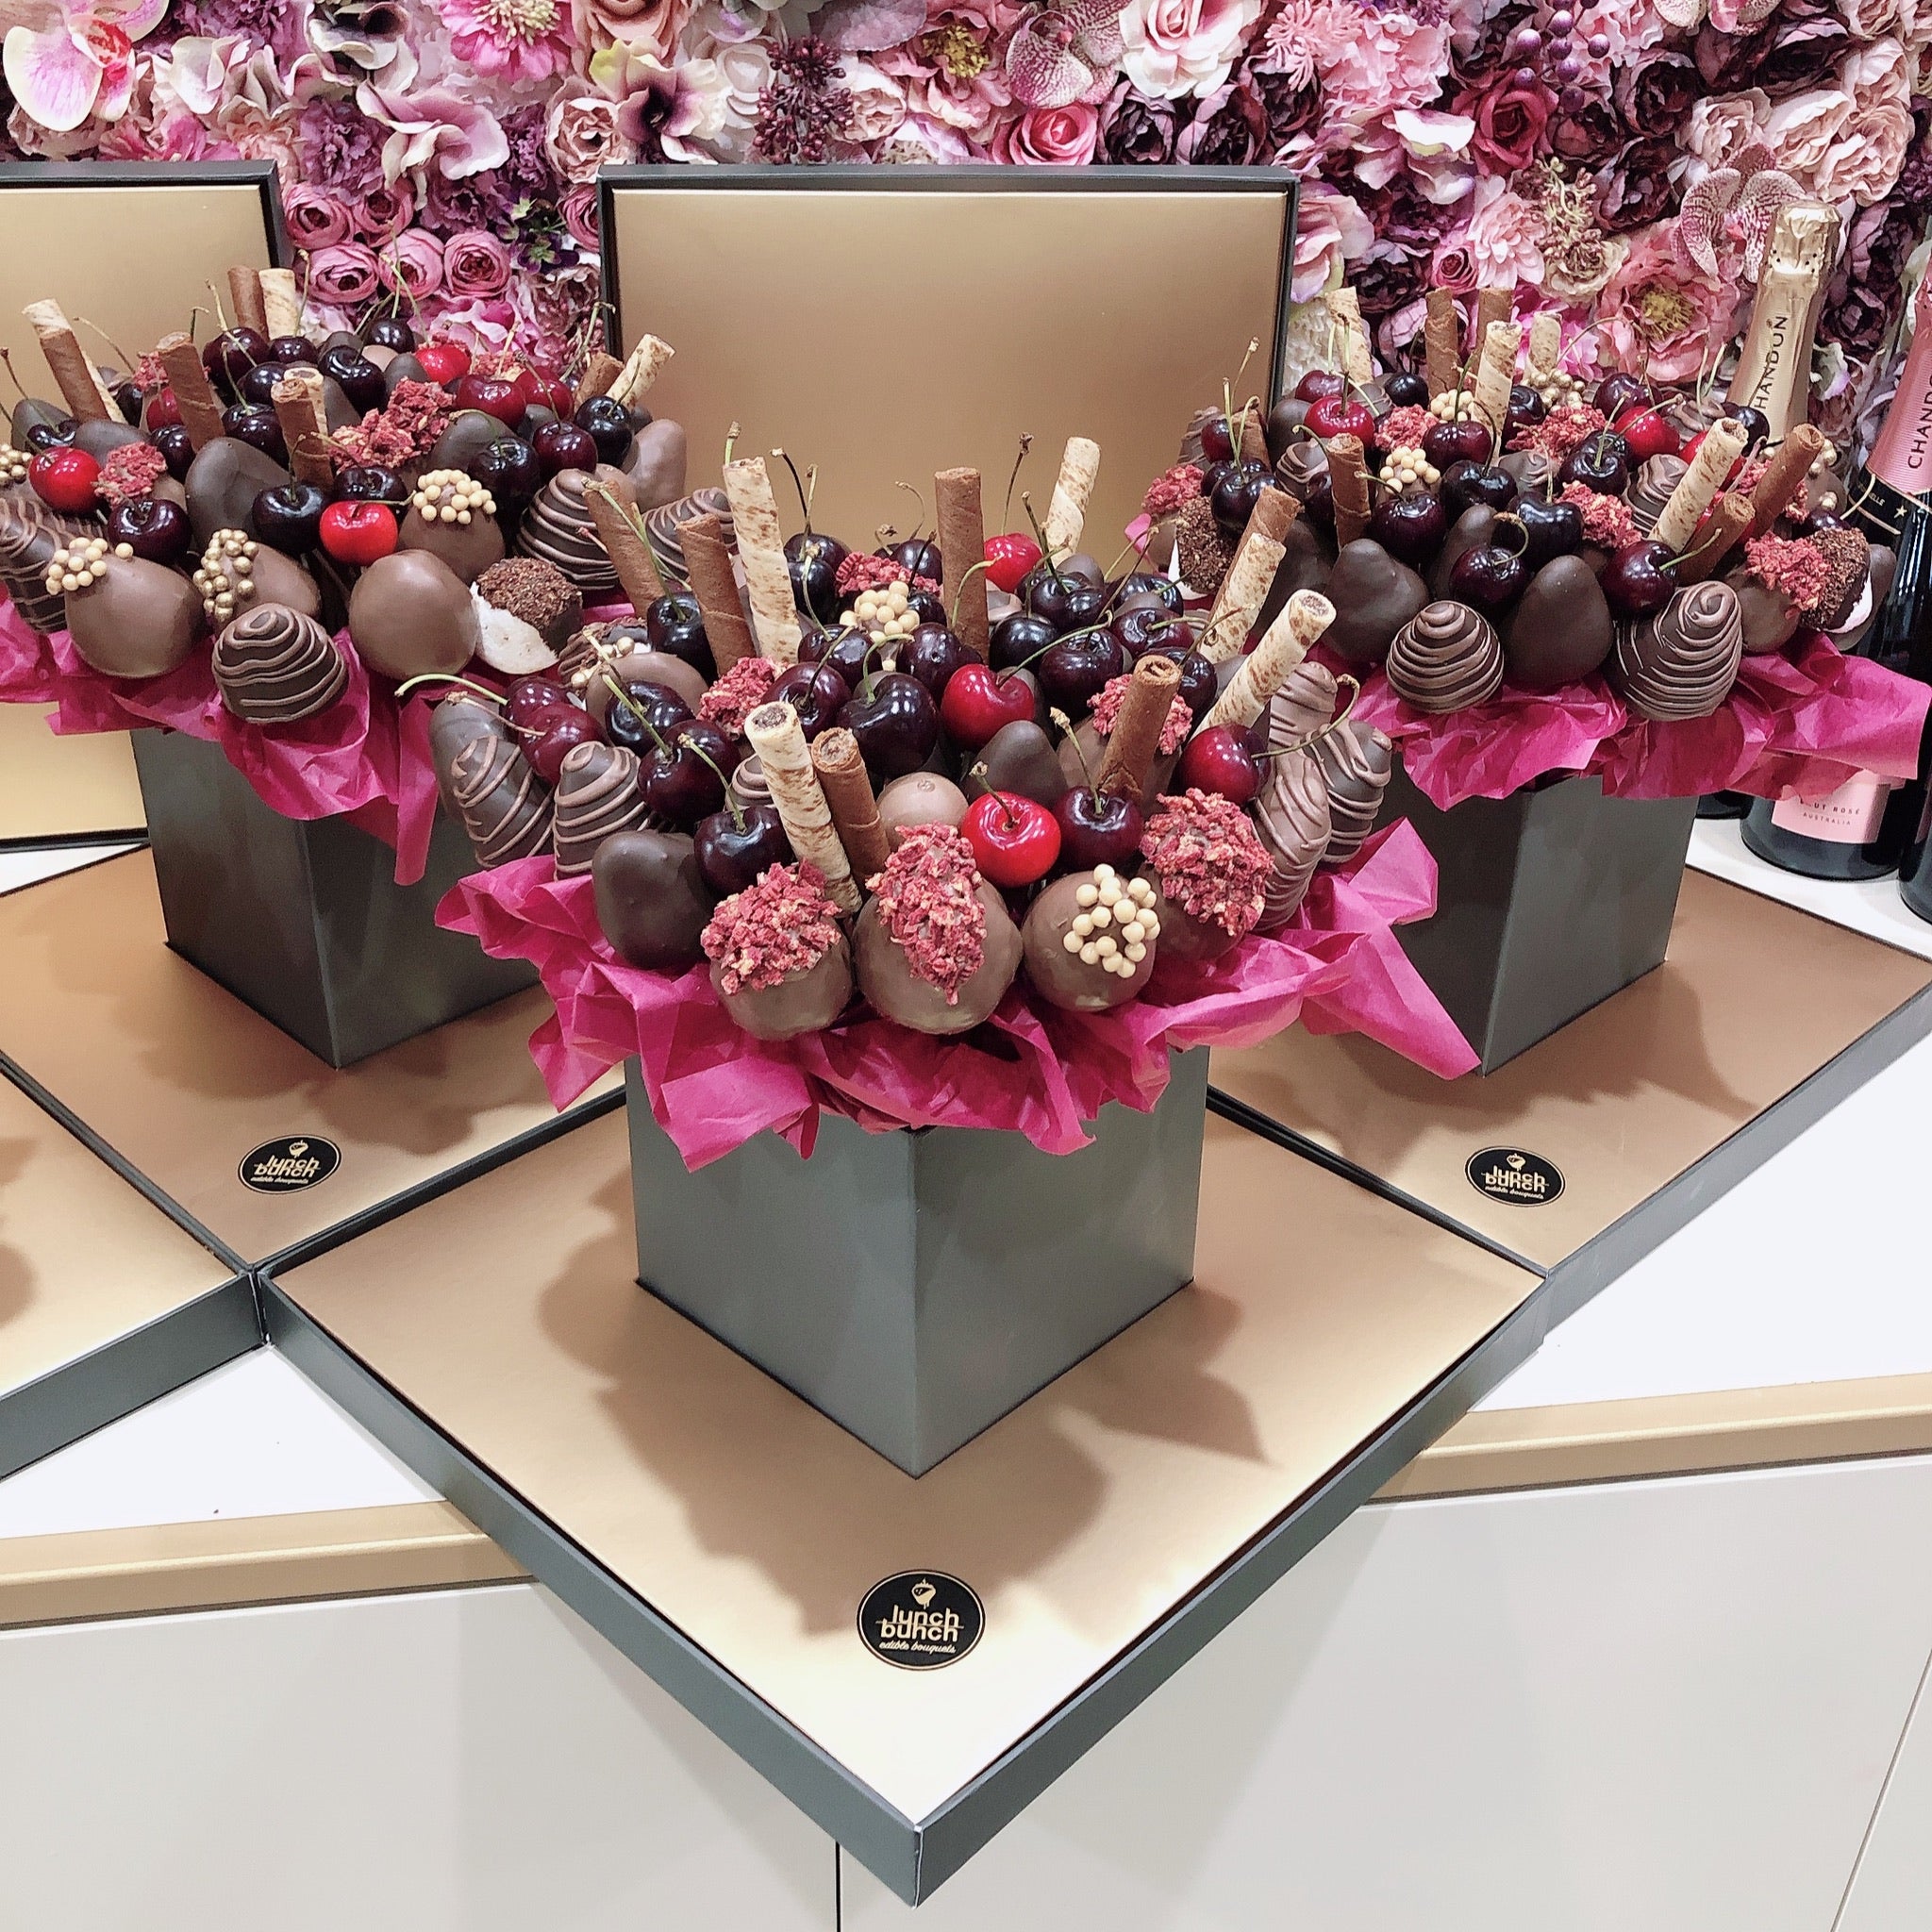 Fresh cherries and strawberries covered in chocolate Bouquet, gift wrapped bouquet